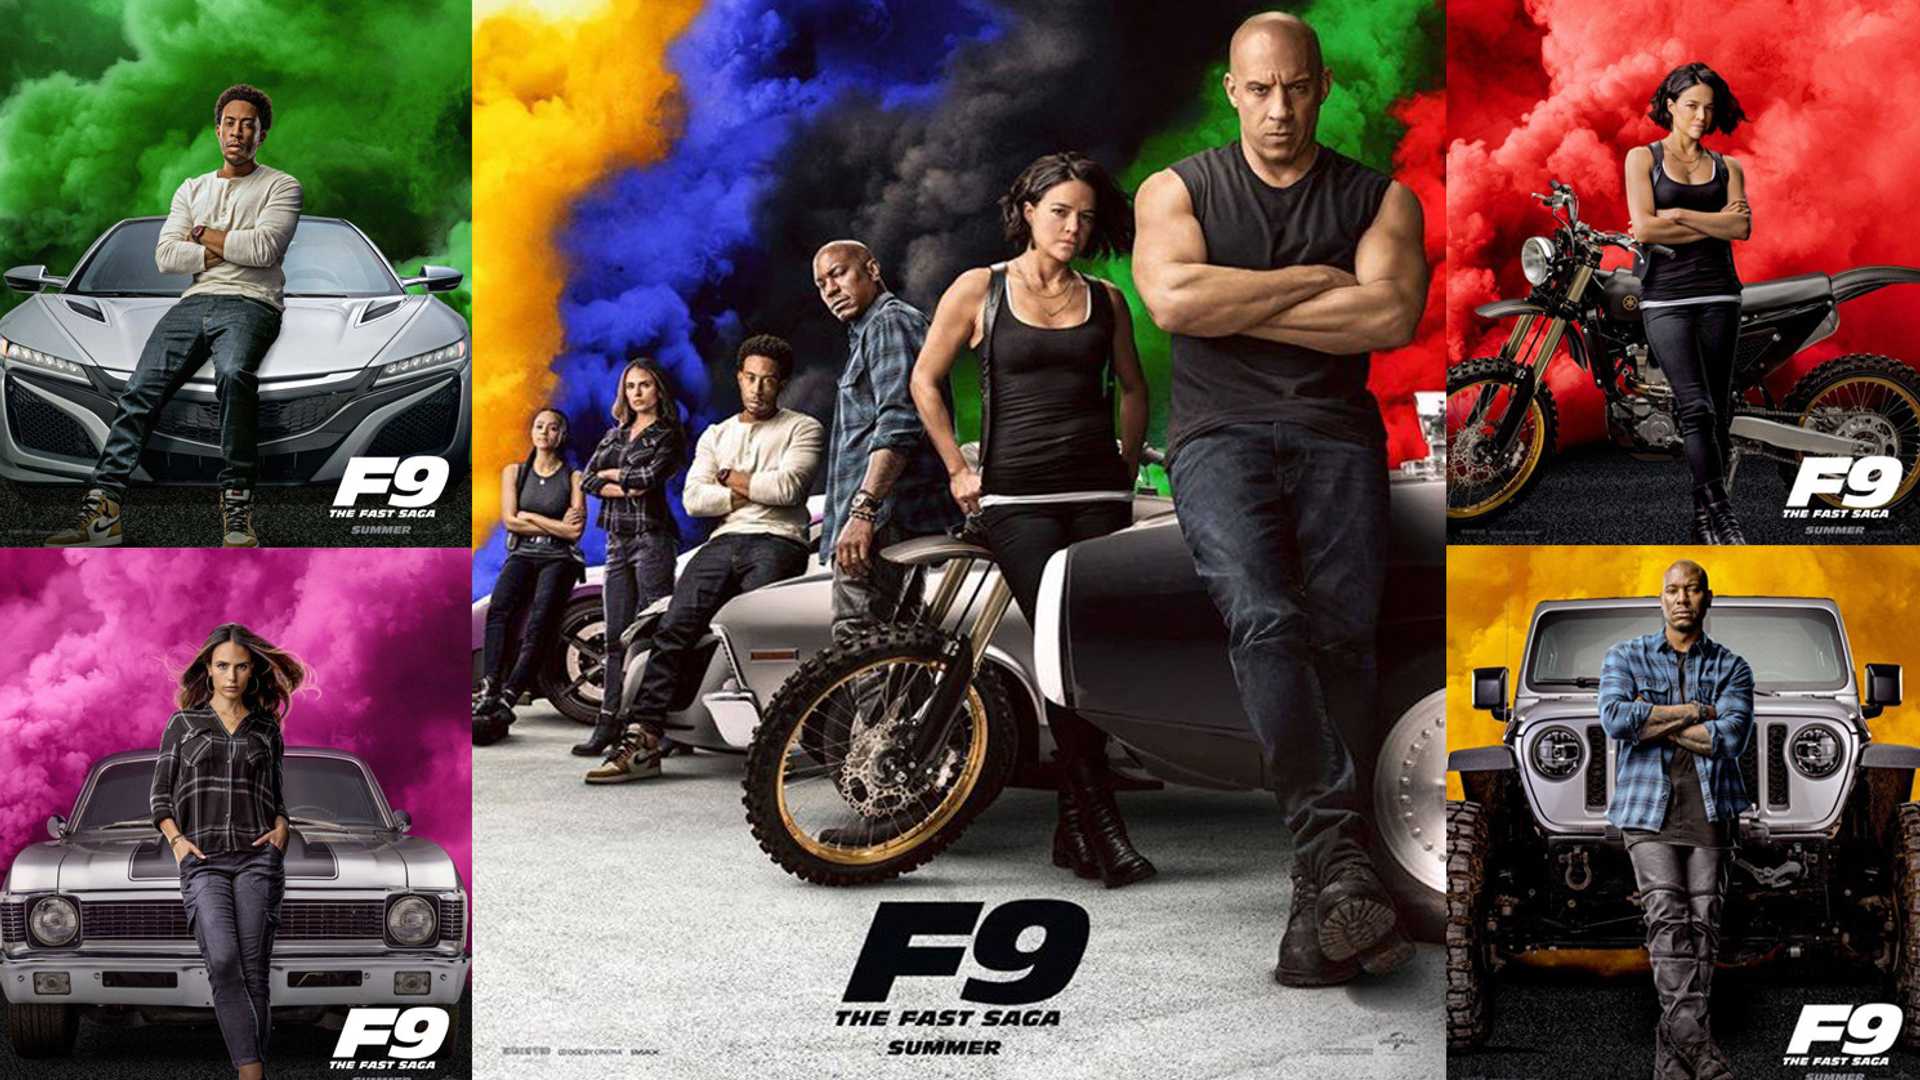 Second "F9" Trailer Released: The Ninth Installment of the 'Fast and Furious Franchise